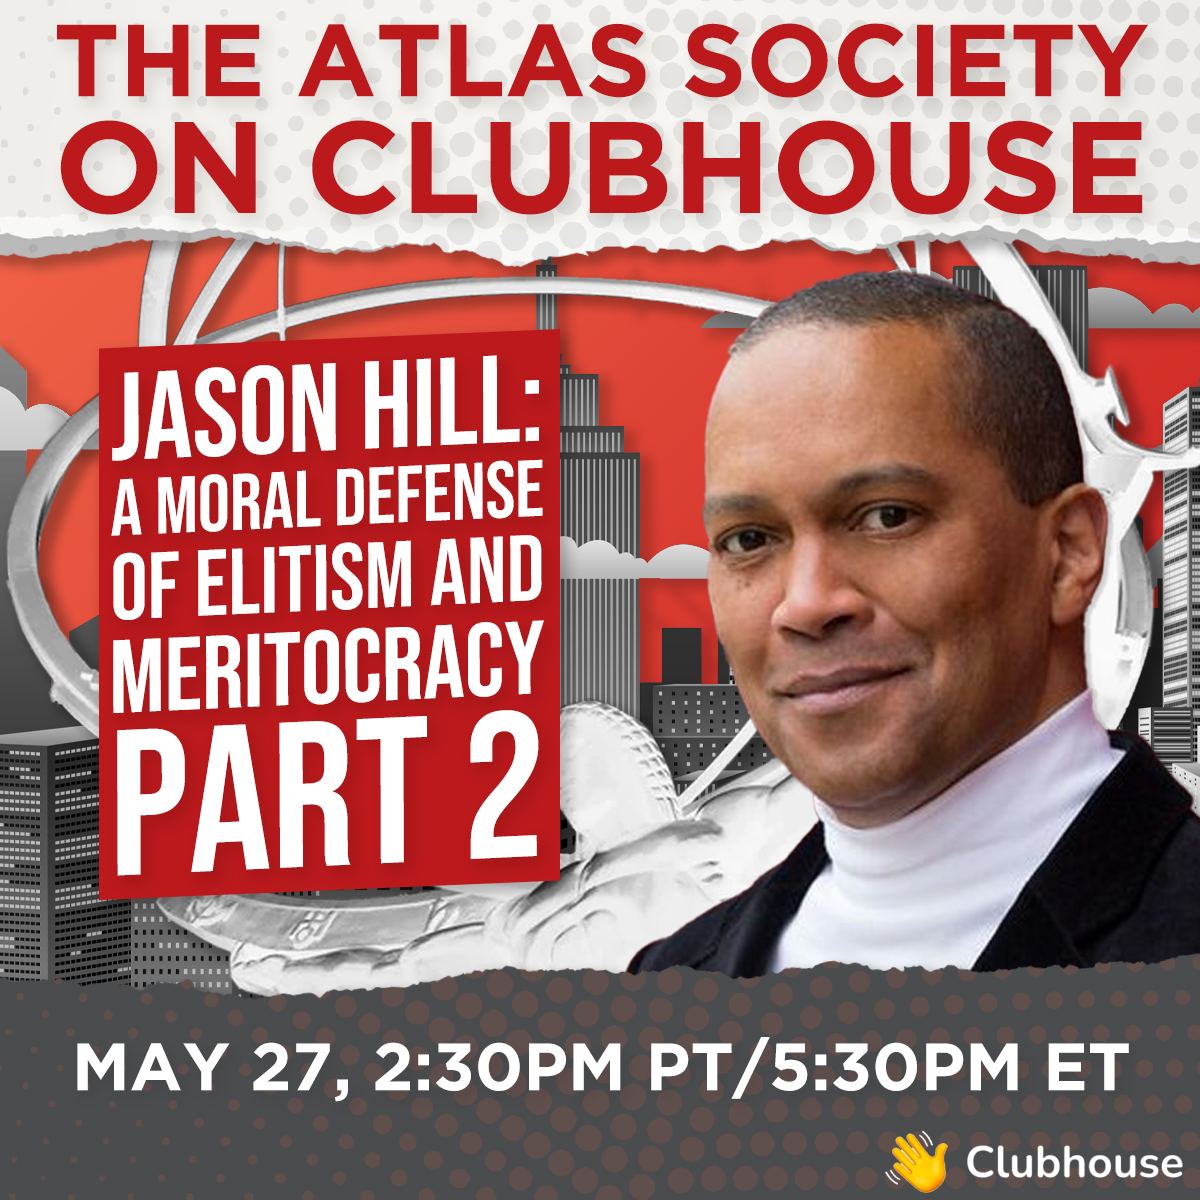 Jason Hill -  A Moral Defense of Elitism and Meritocracy Part 2